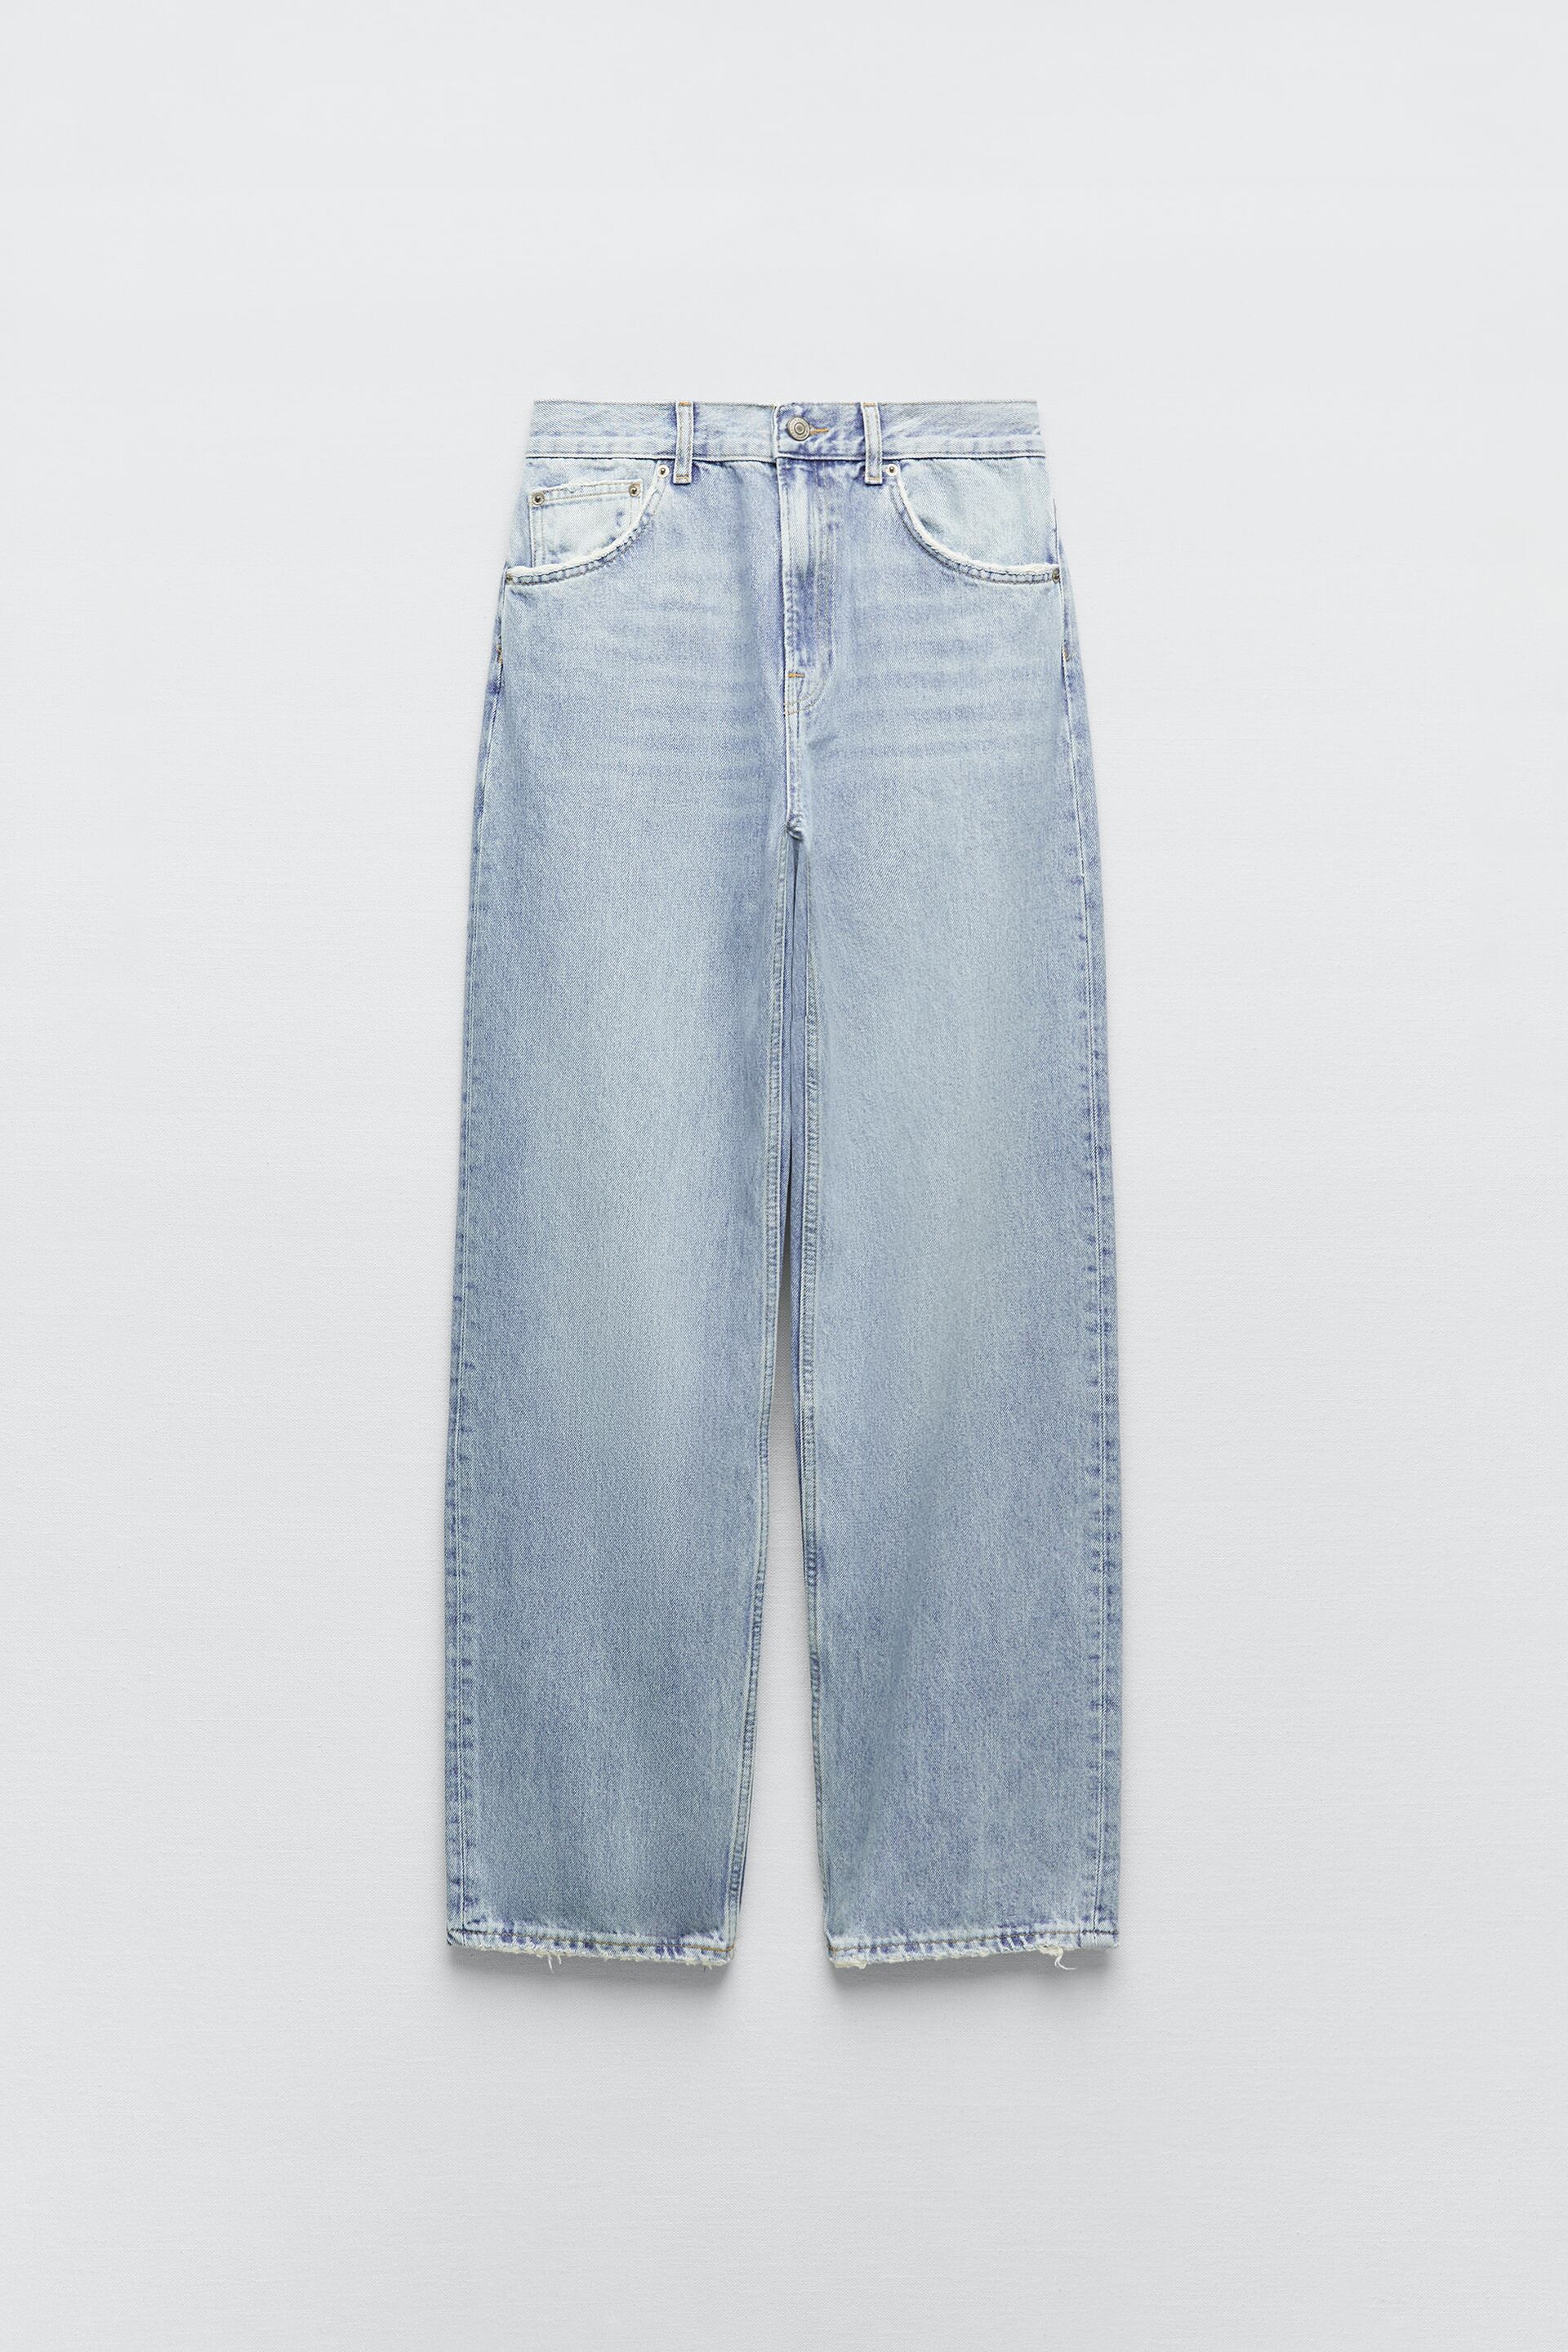 Peck Disgraceful Promote ZW THE RELAXED FIT JEANS - Light blue | ZARA United States